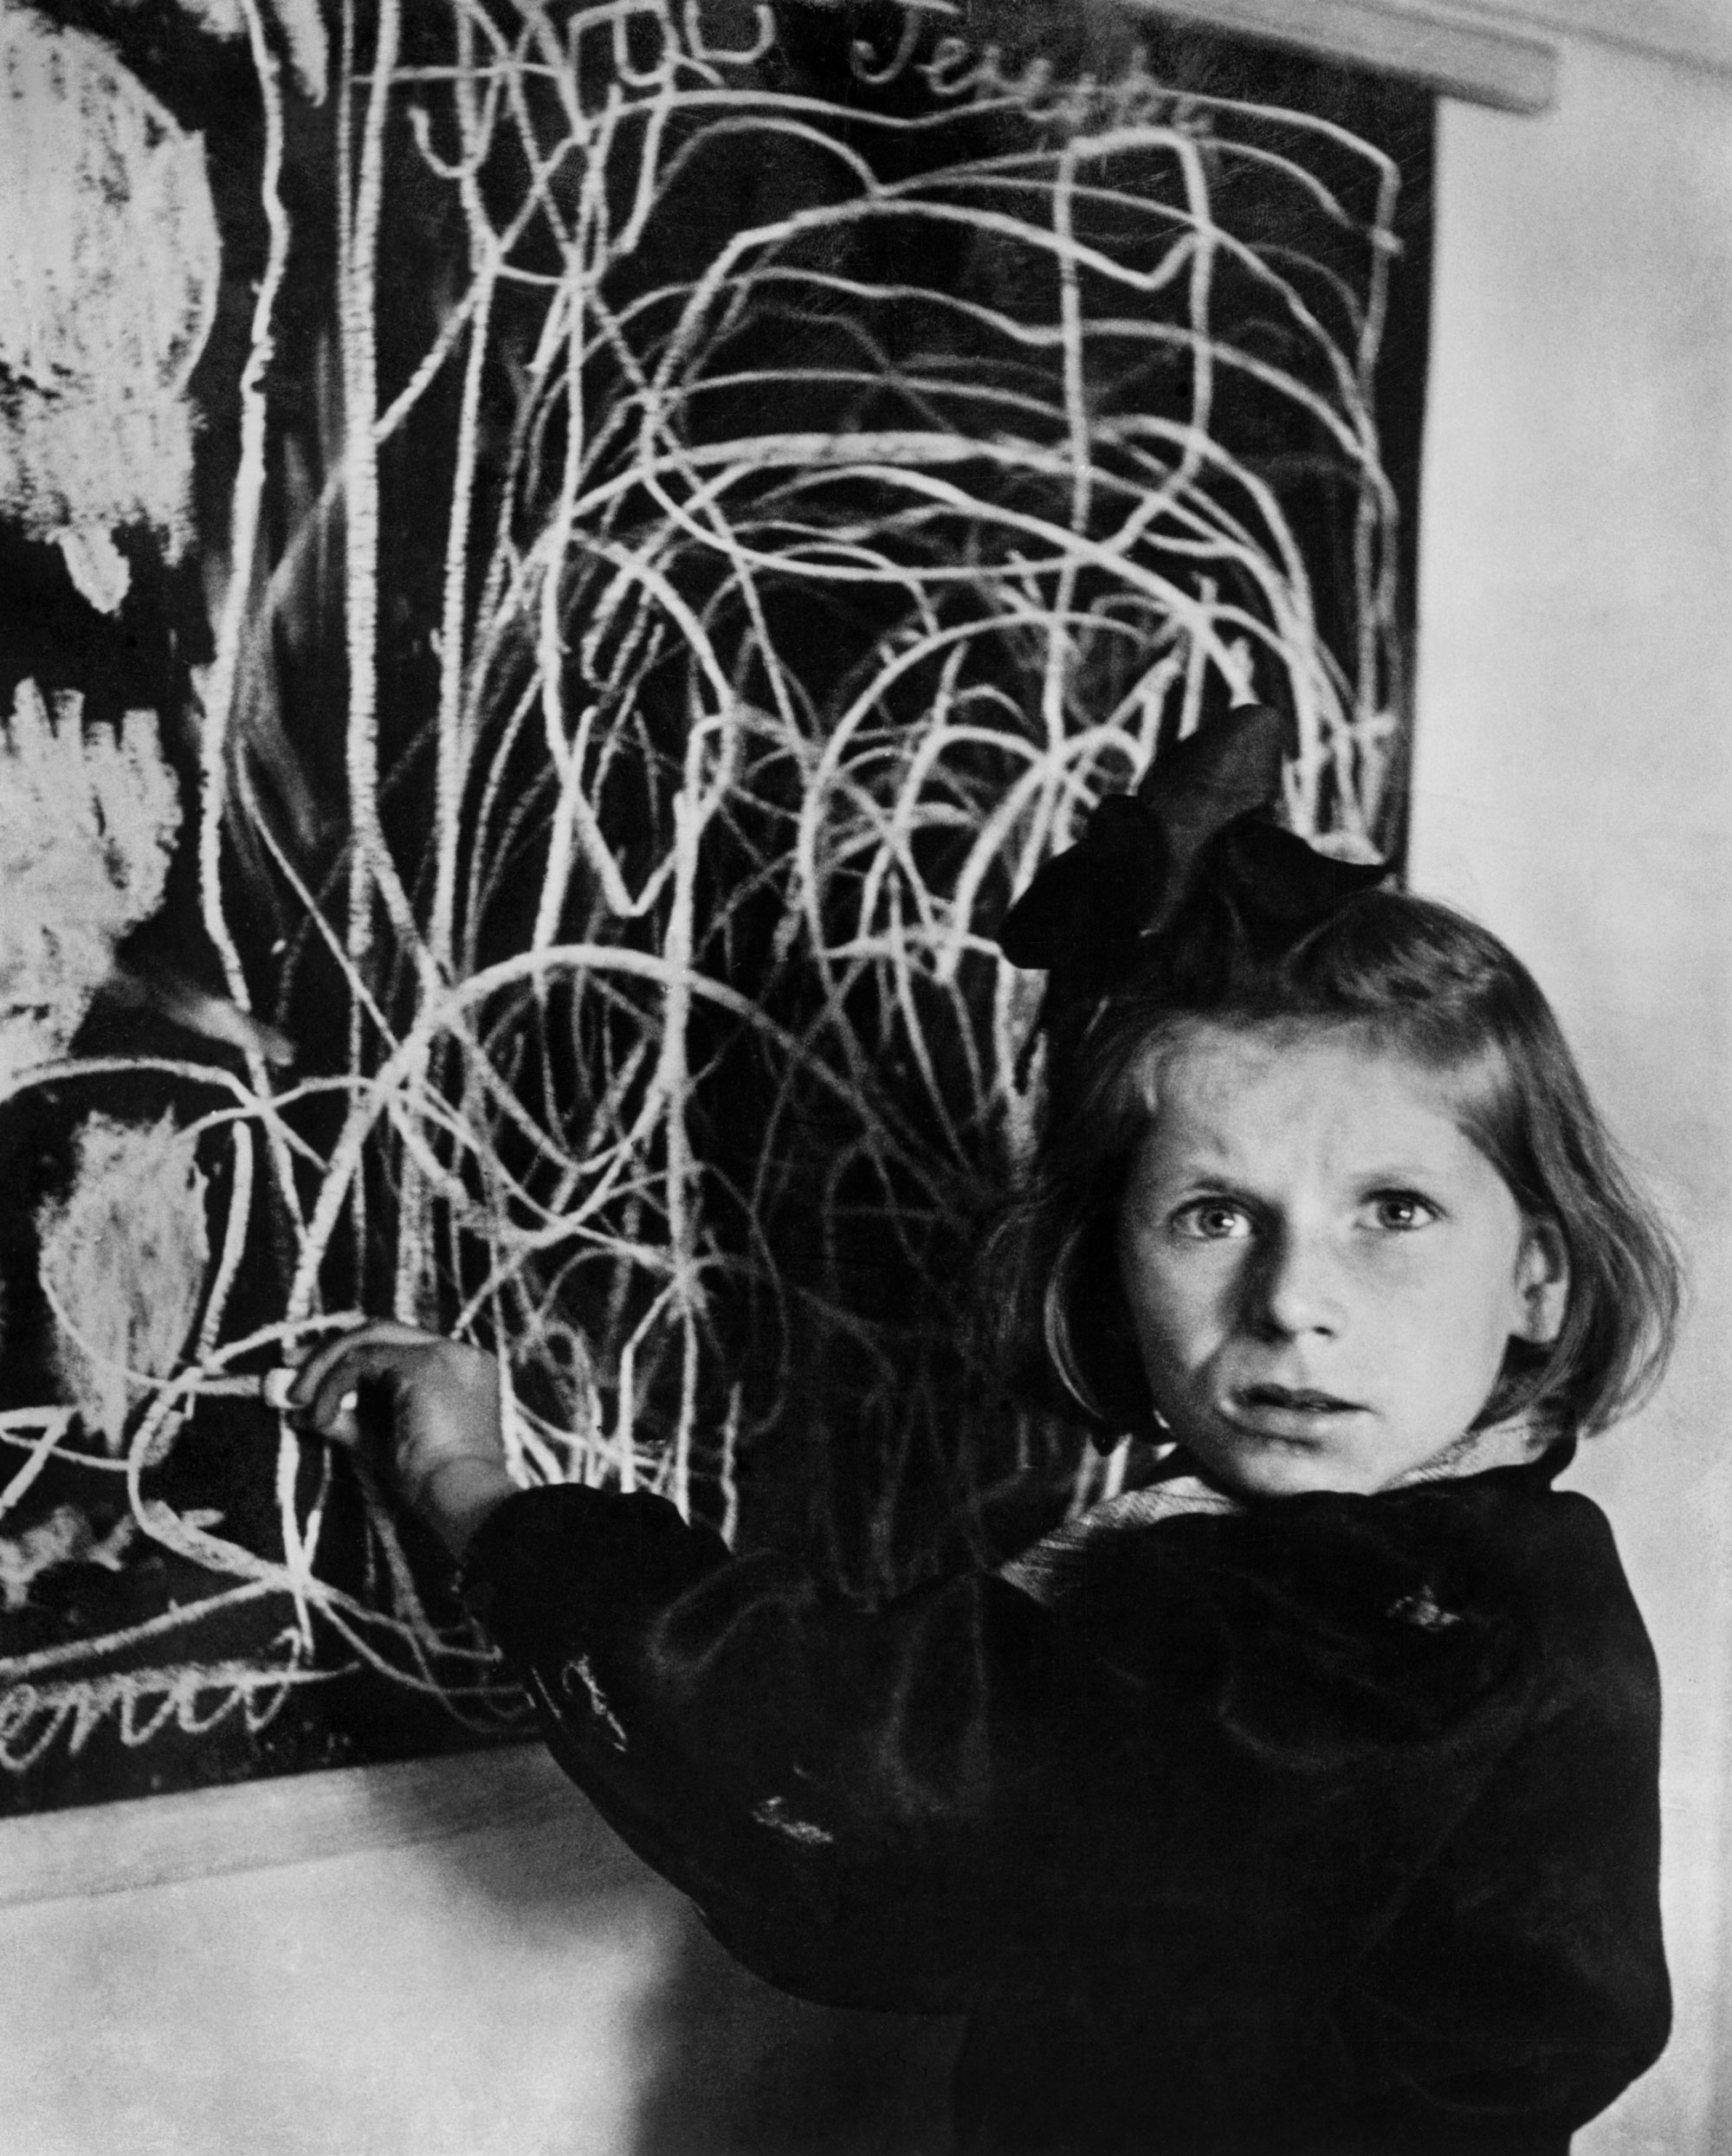 Tereska, a child in a residence for disturbed children. She drew a picture of "home" on the blackboard. Warsaw, 1948. (David 'Chim' Seymour—Magnum Photos)